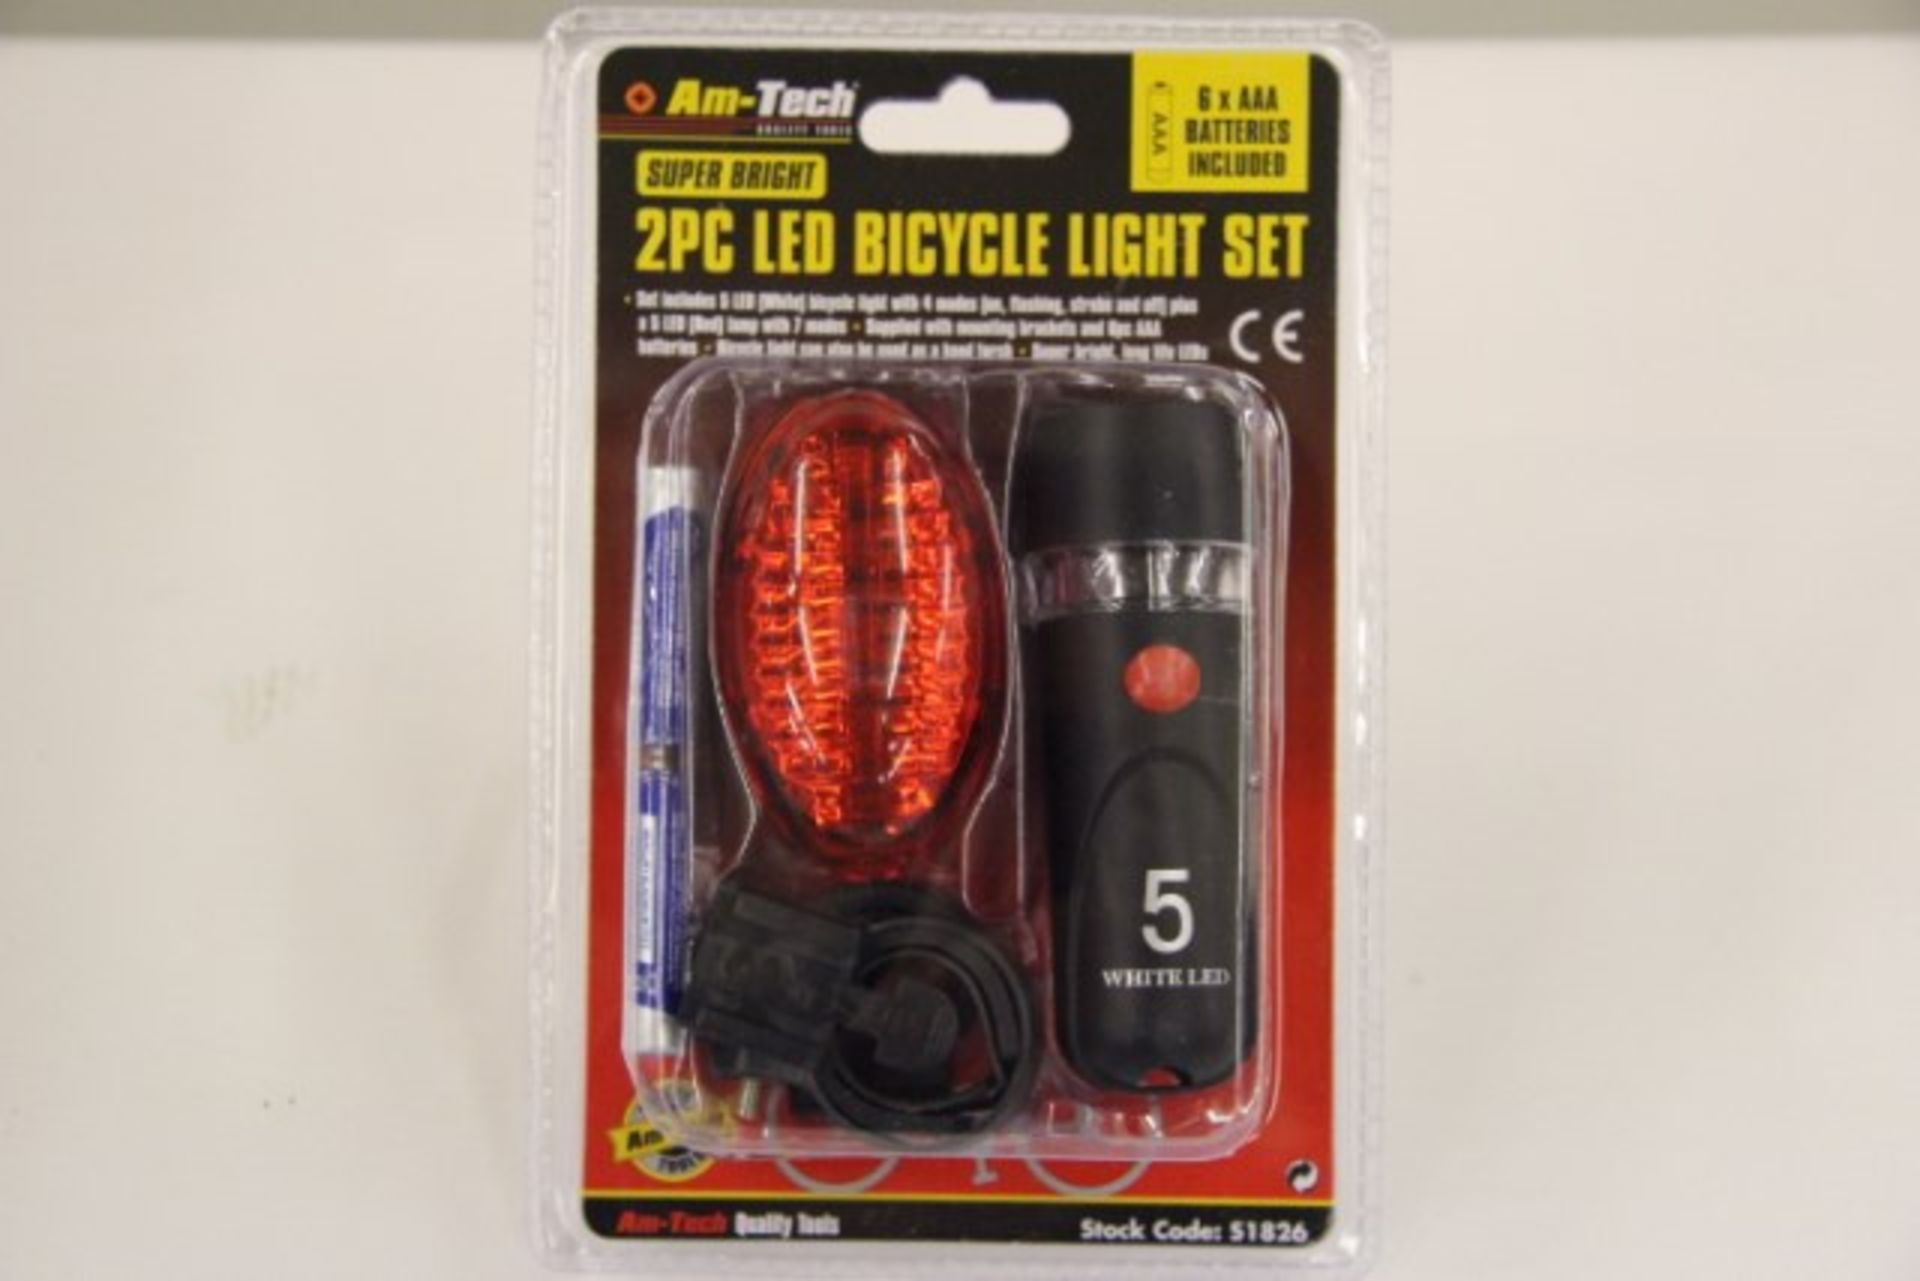 V Brand New 2 Piece LED Bicycle Light Set With White Lamp With Flashing Mode And Red Light